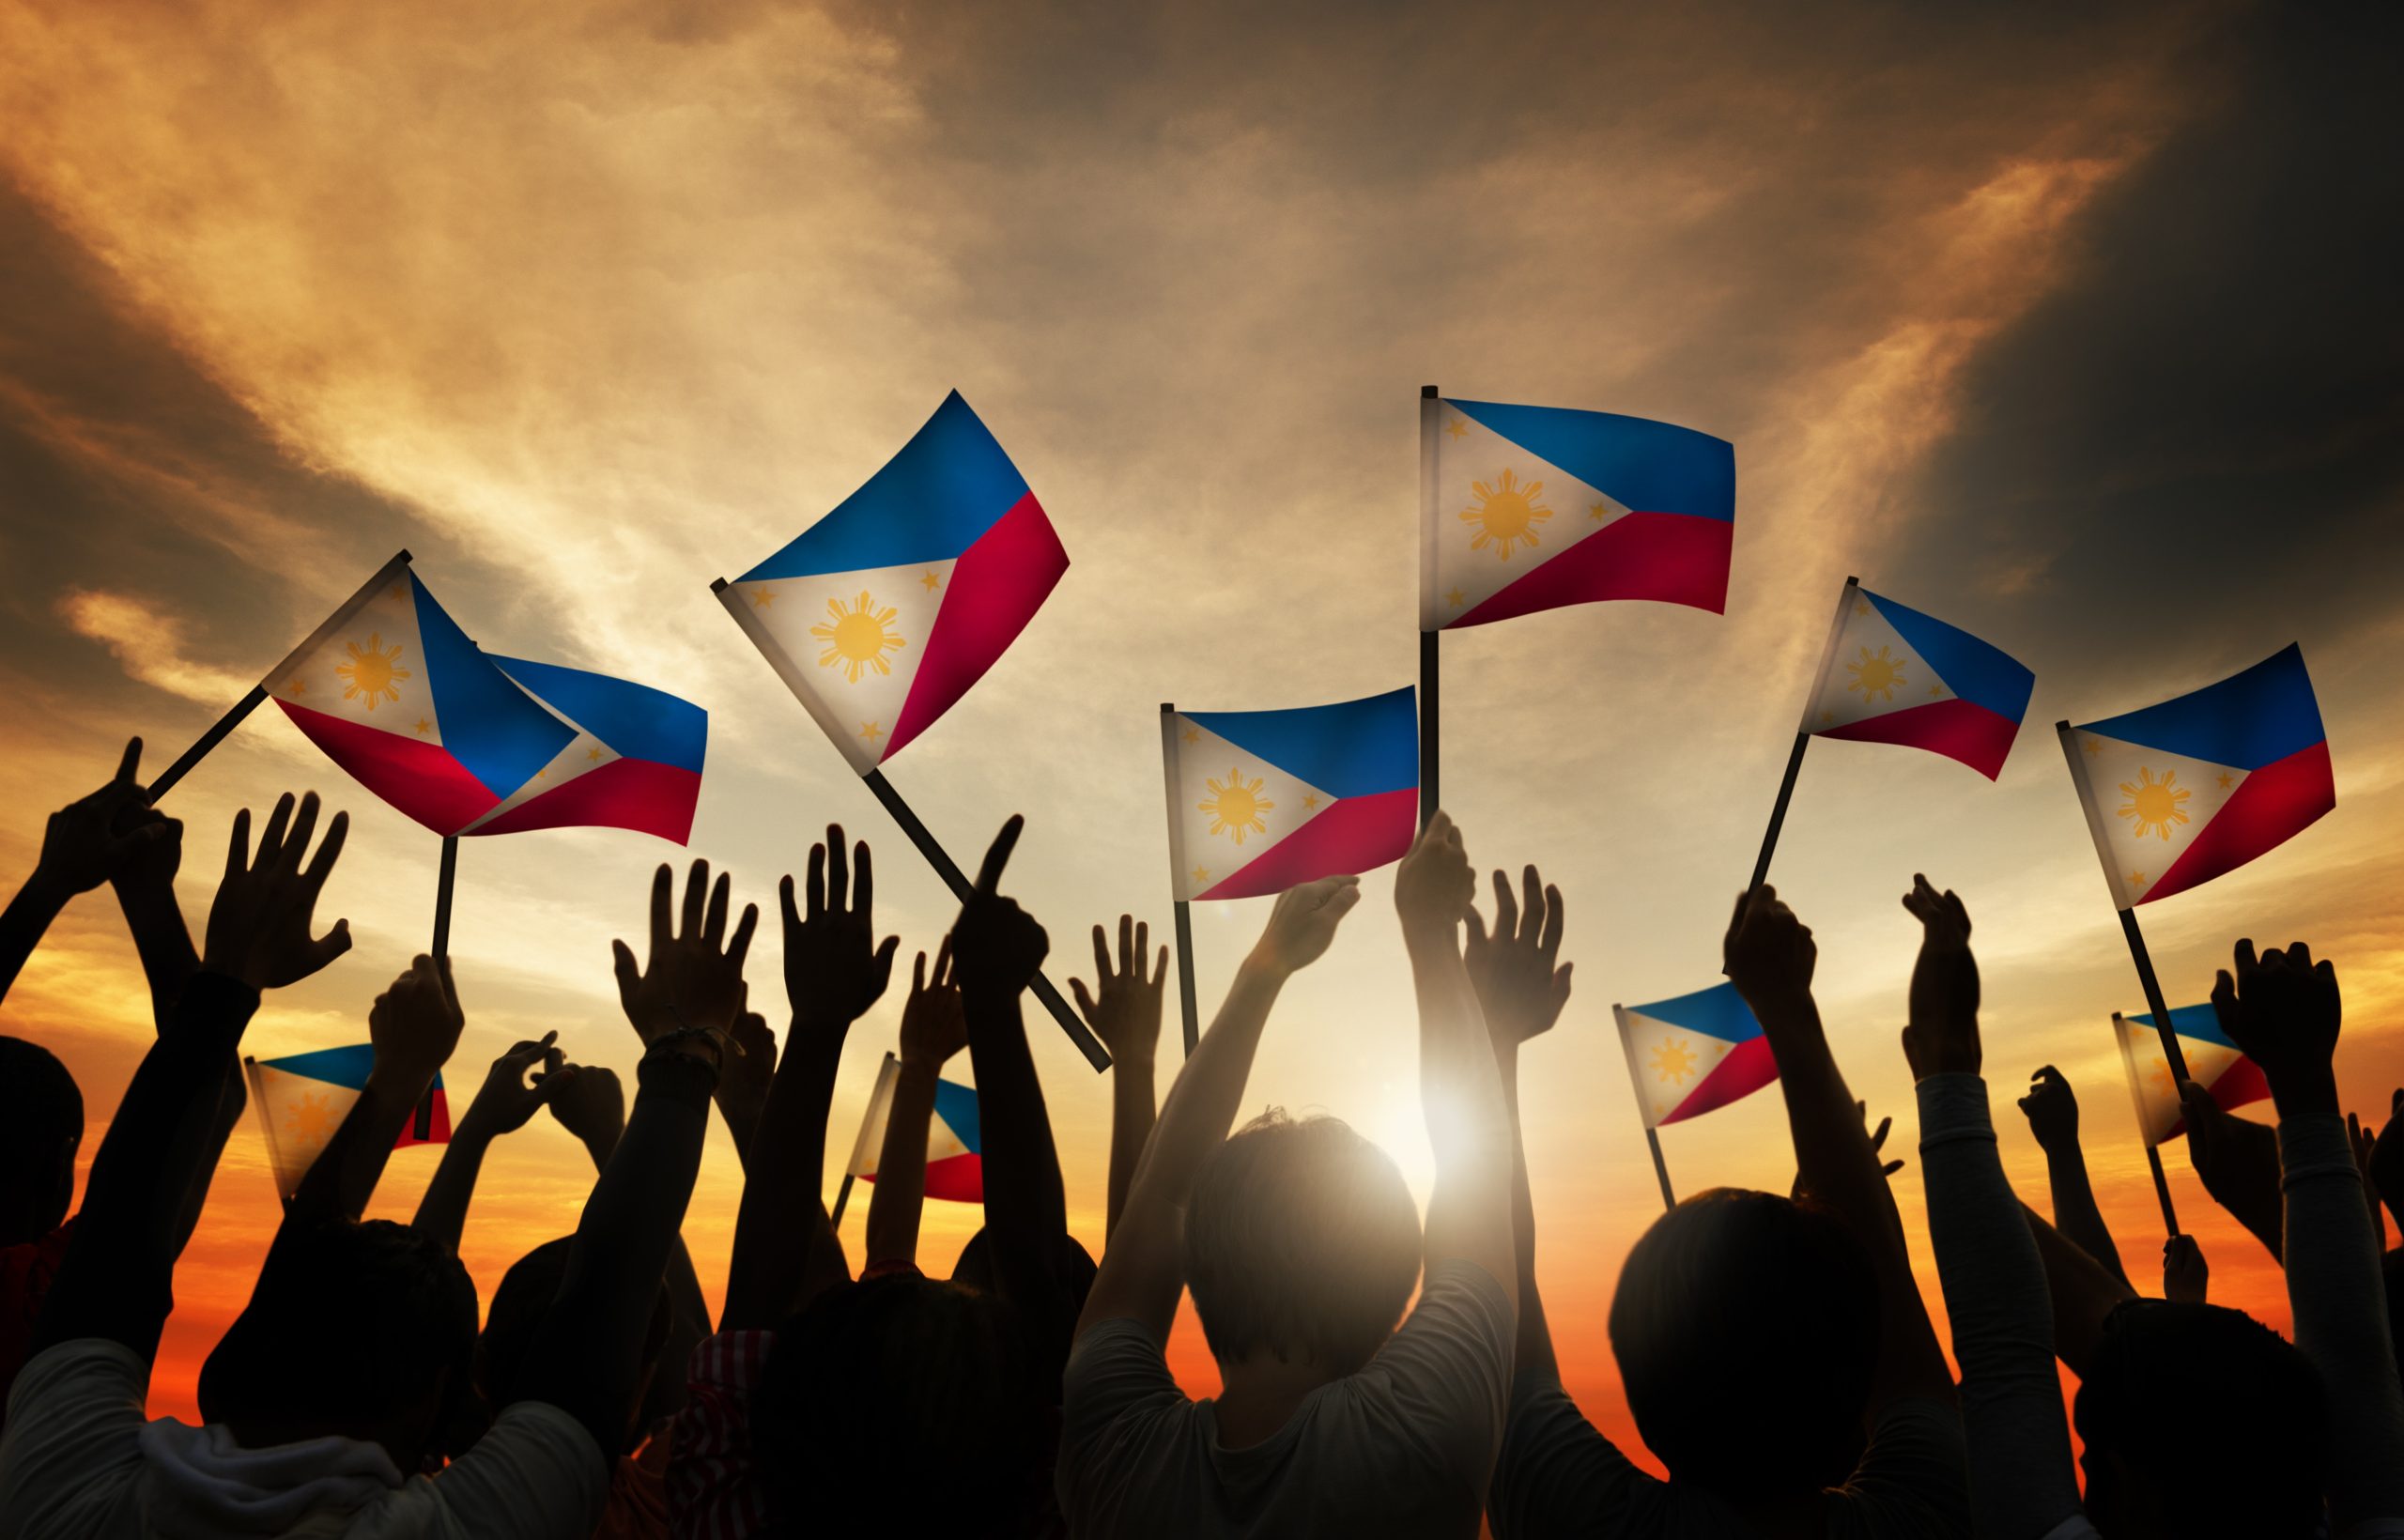 Flags of the Philippines